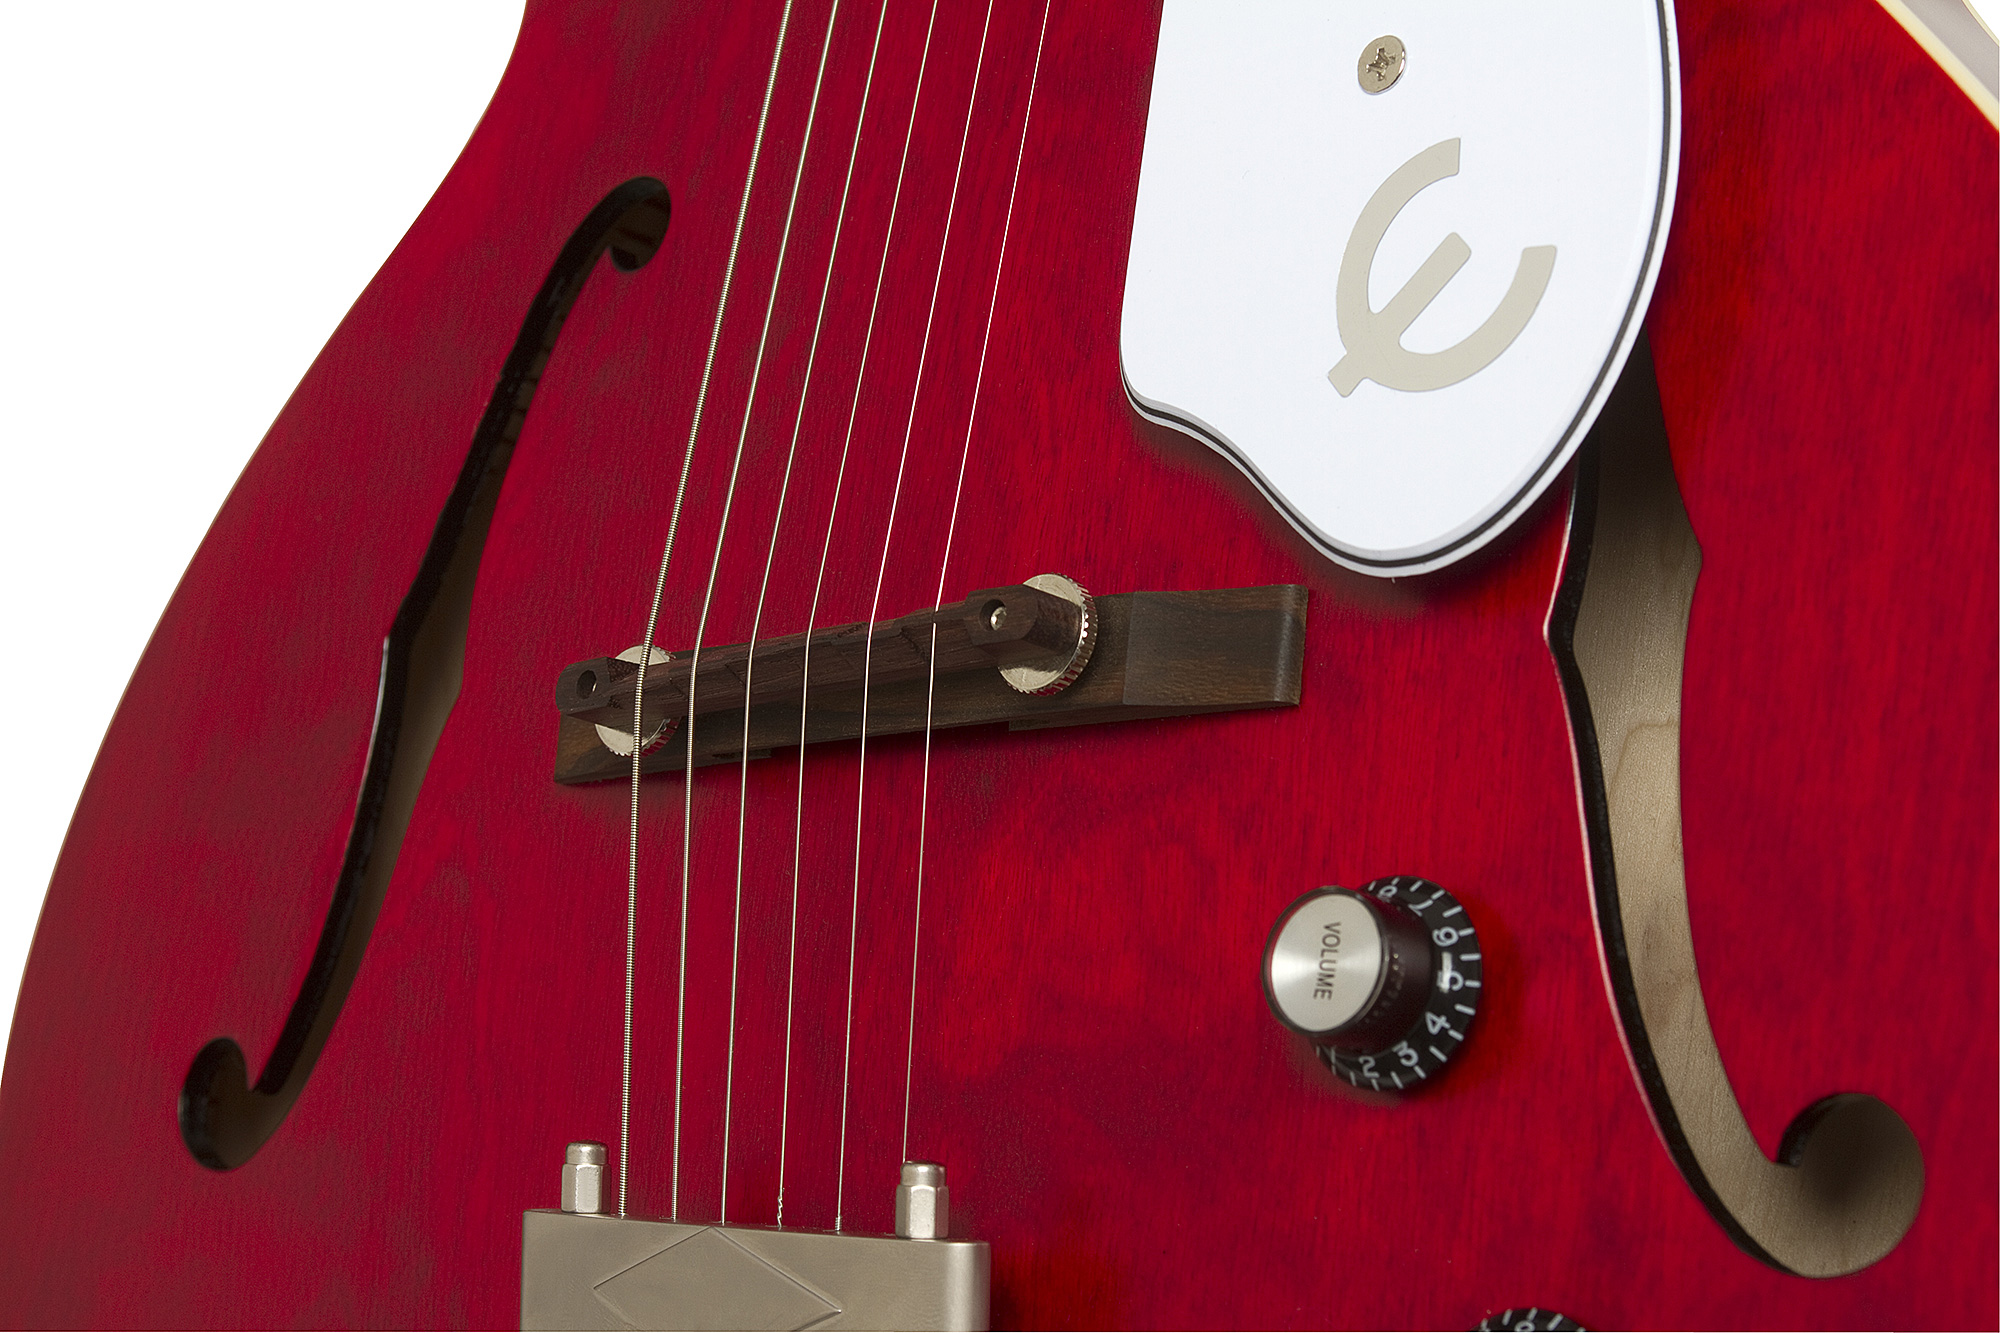 Epiphone Inspired By 1966 Century 2016 - Aged Gloss Cherry - Semi-hollow electric guitar - Variation 3